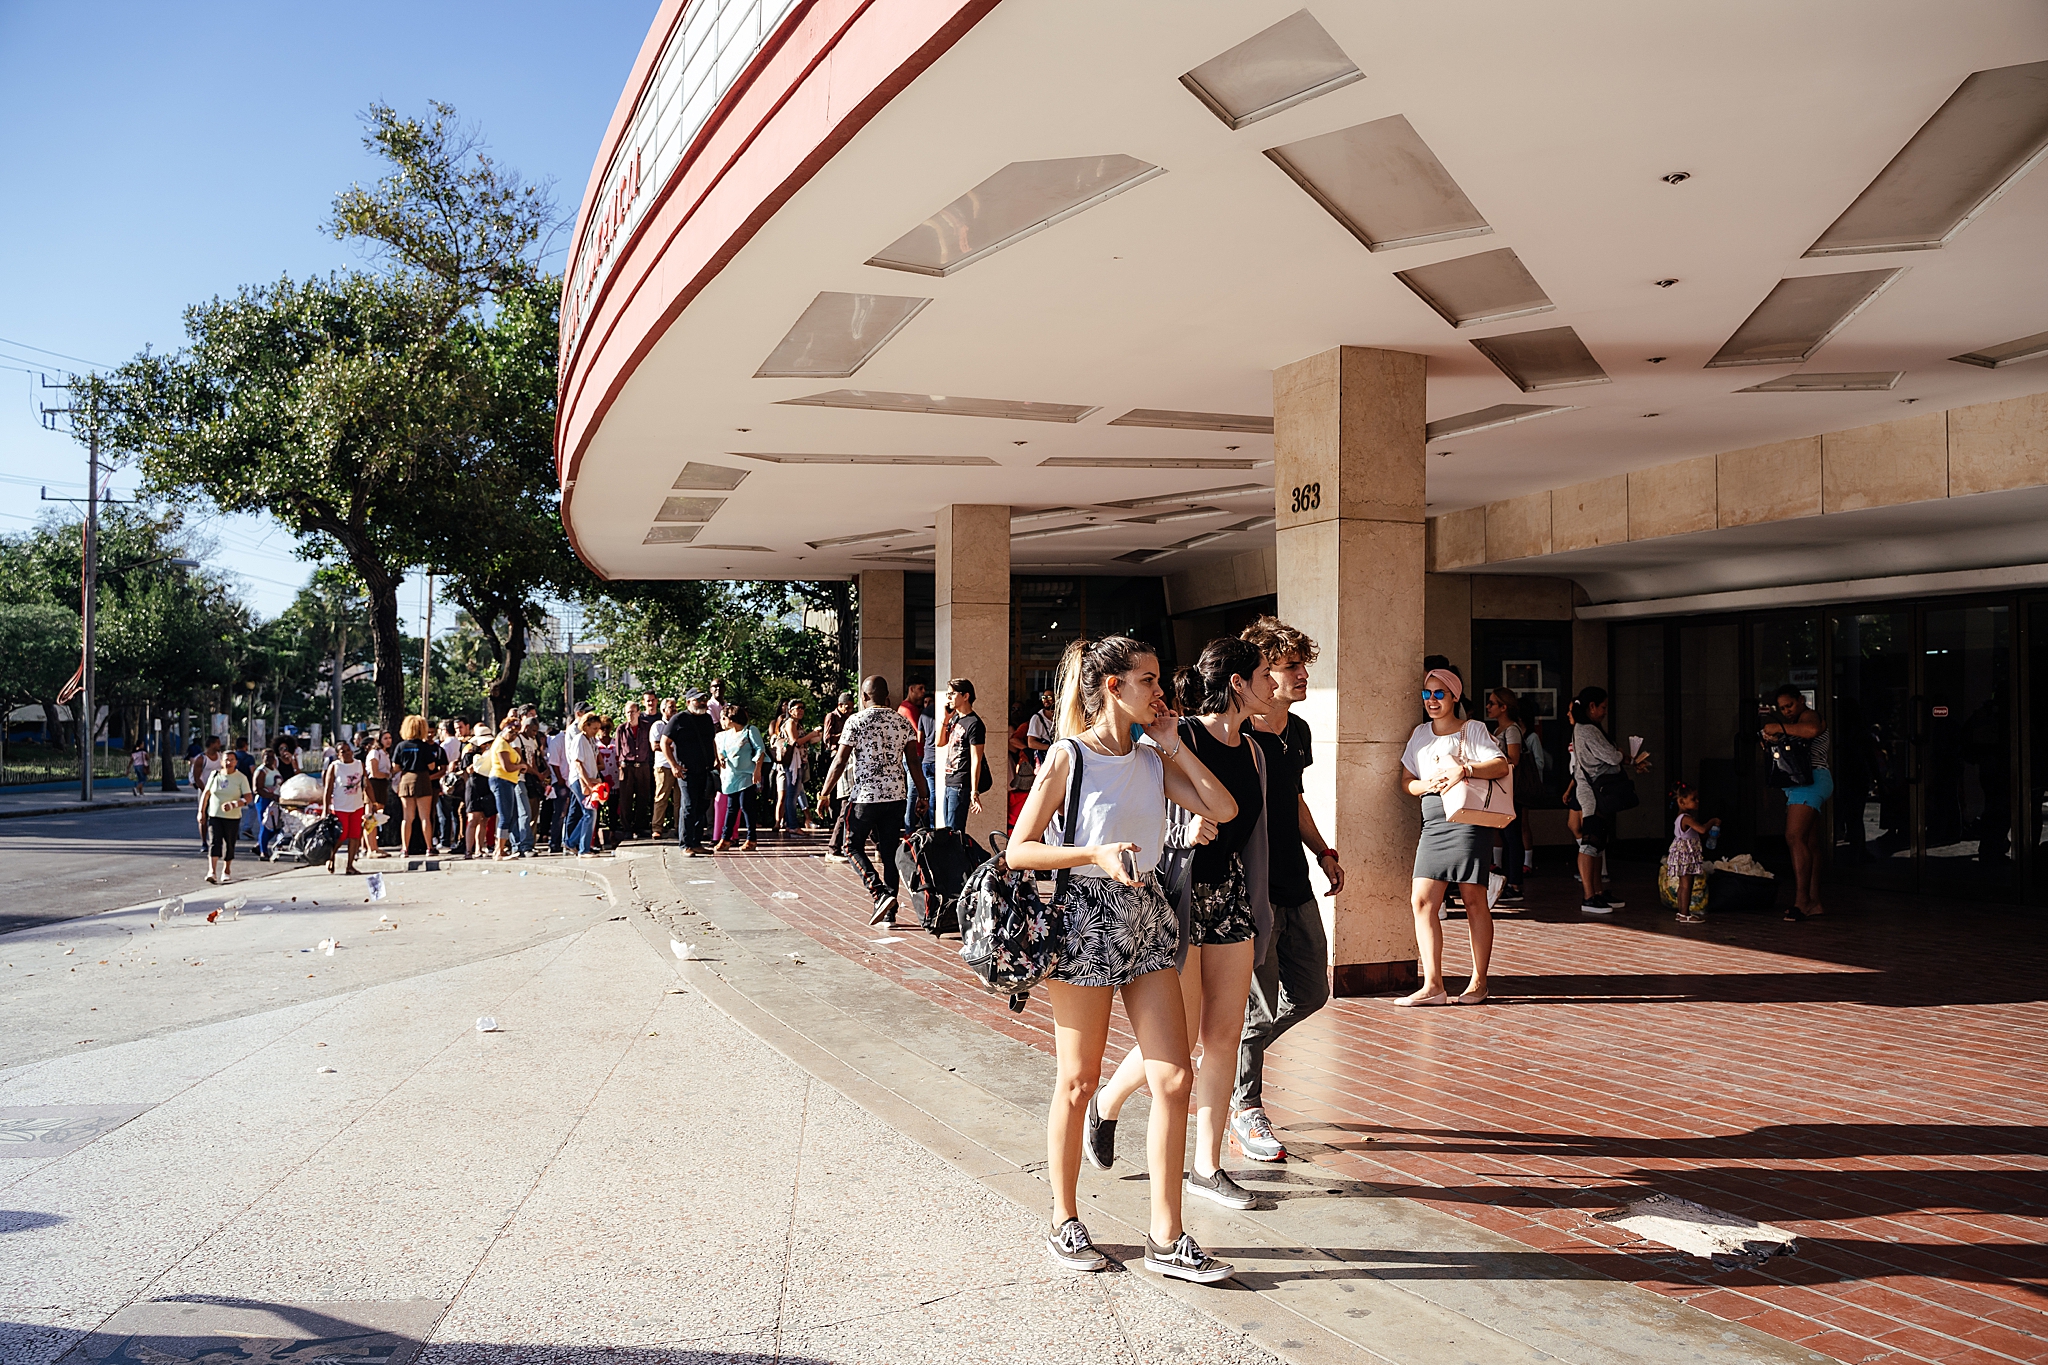  Lines form outside the famous Yara theater in Havana 